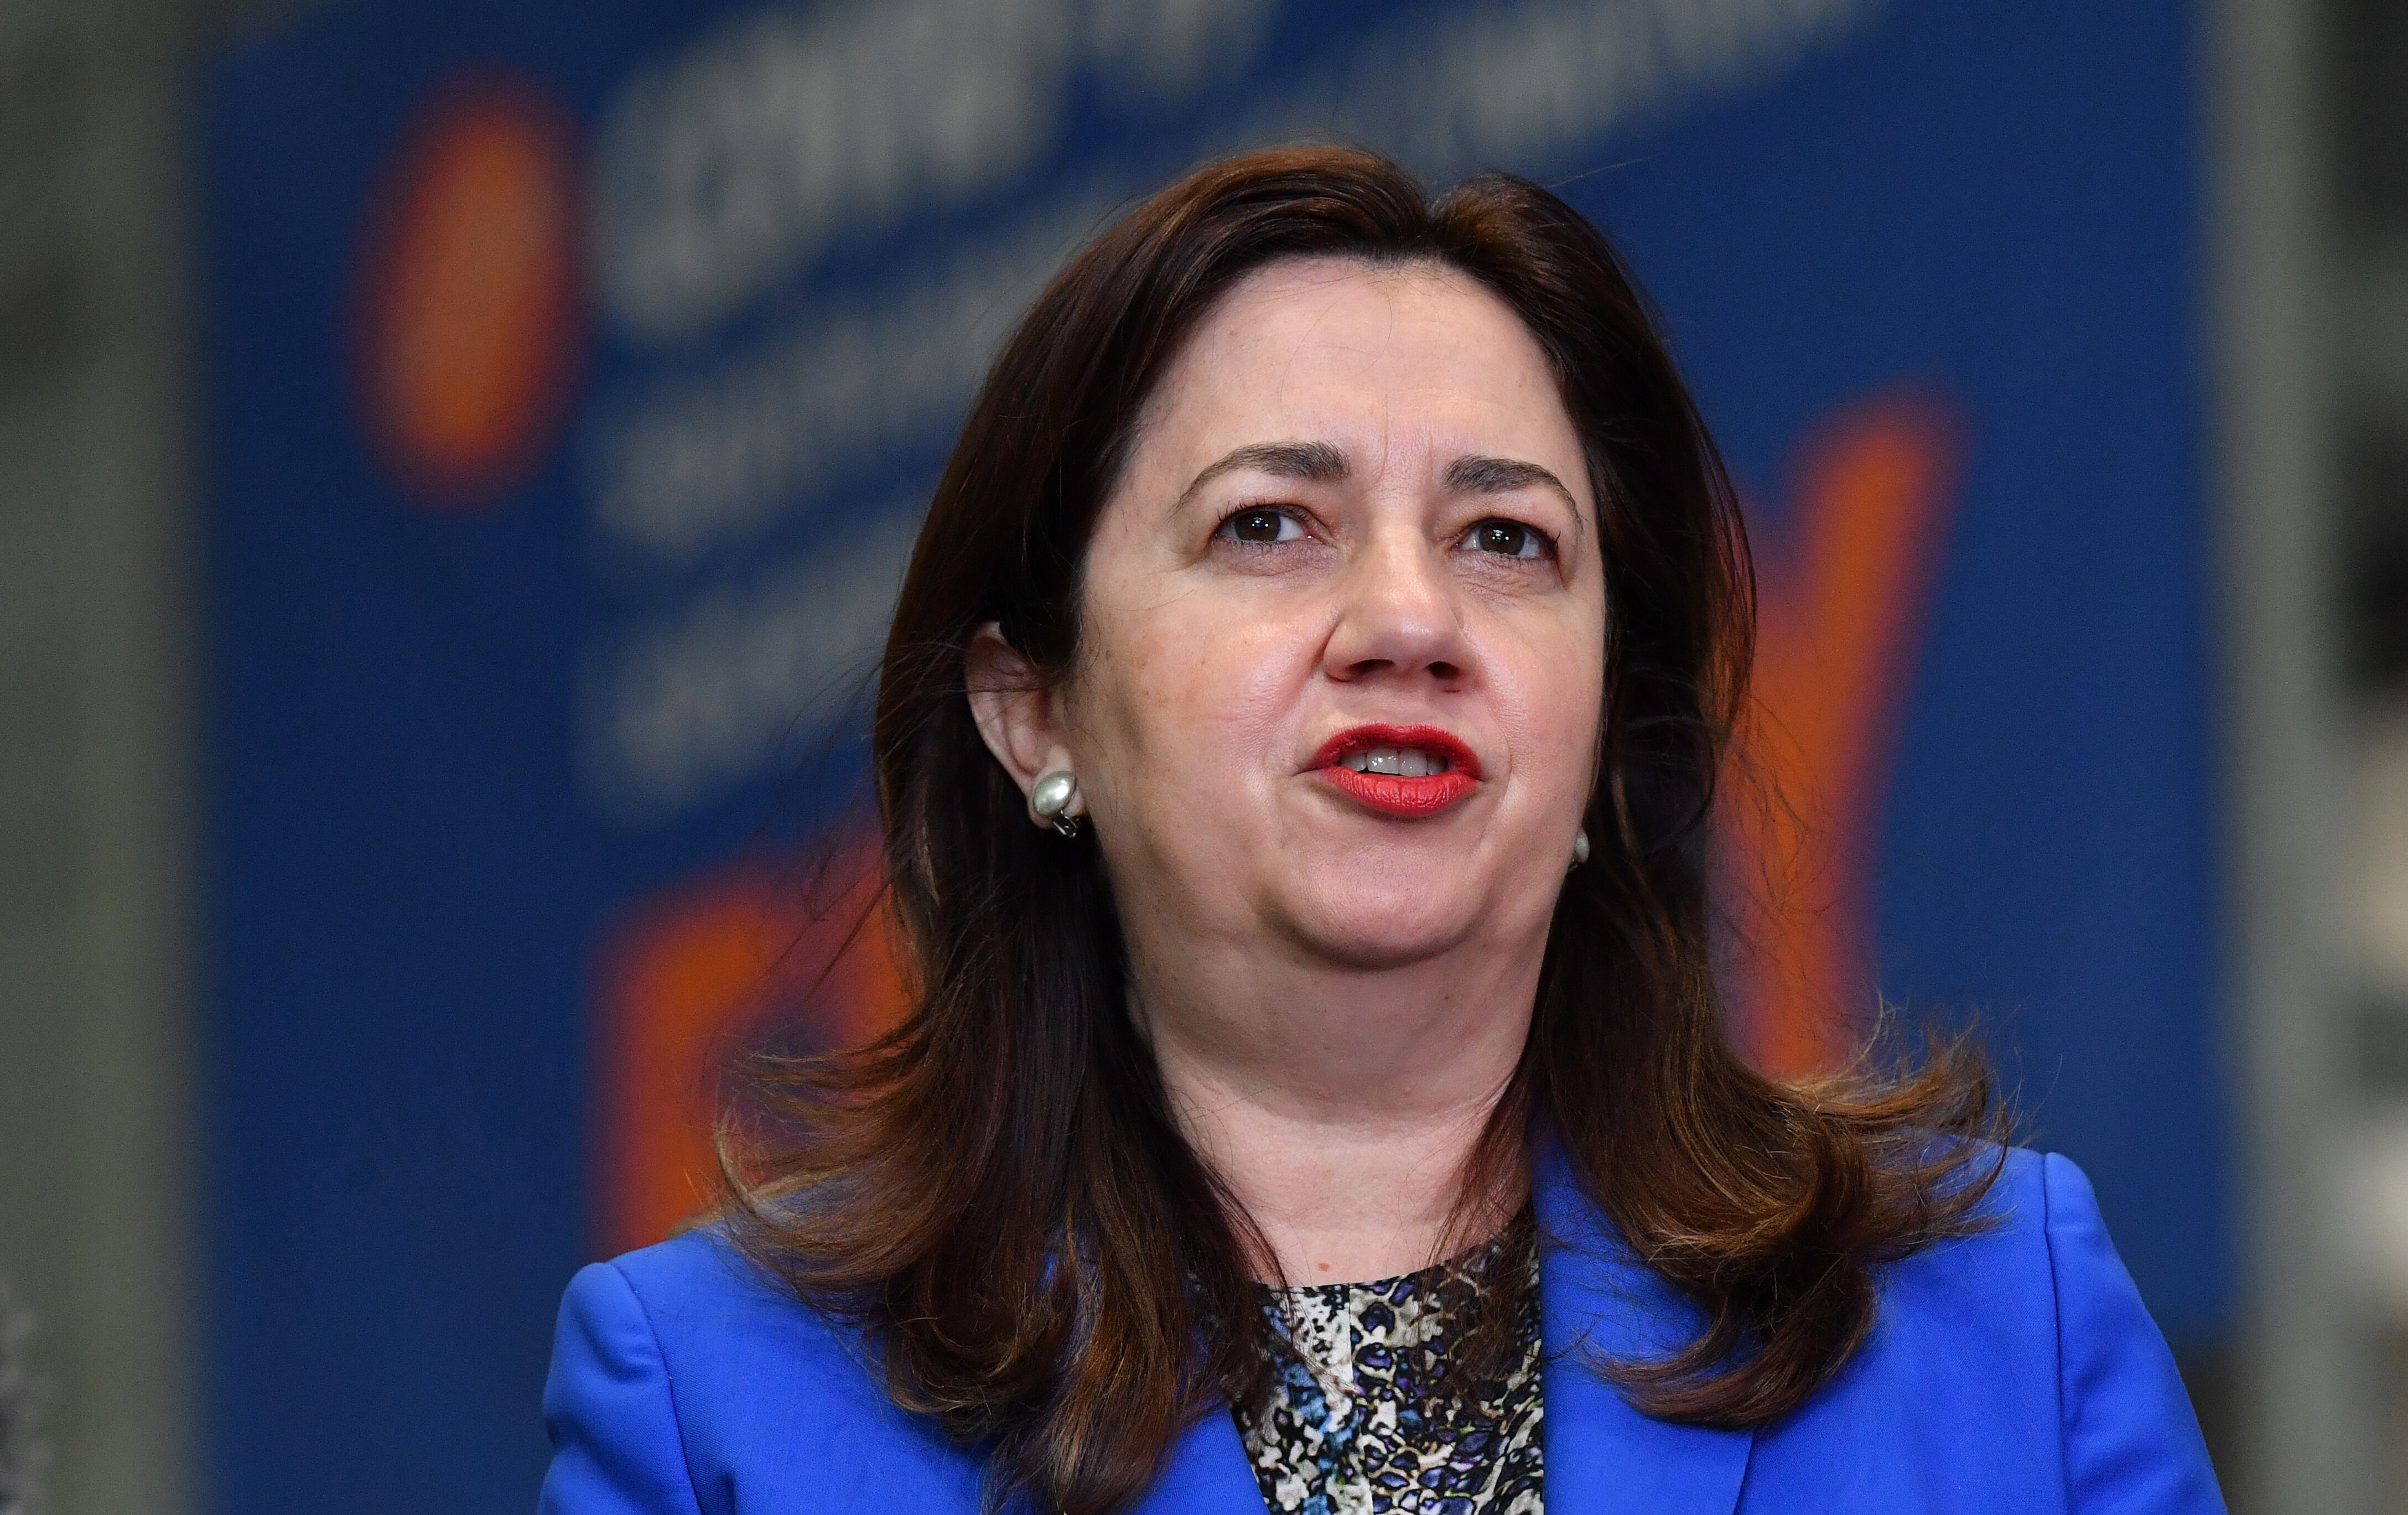 Queensland Premier Annastacia Palaszczuk is seen during a press conference at the  Brisbane Convention and Exhibition Centre in Brisbane.